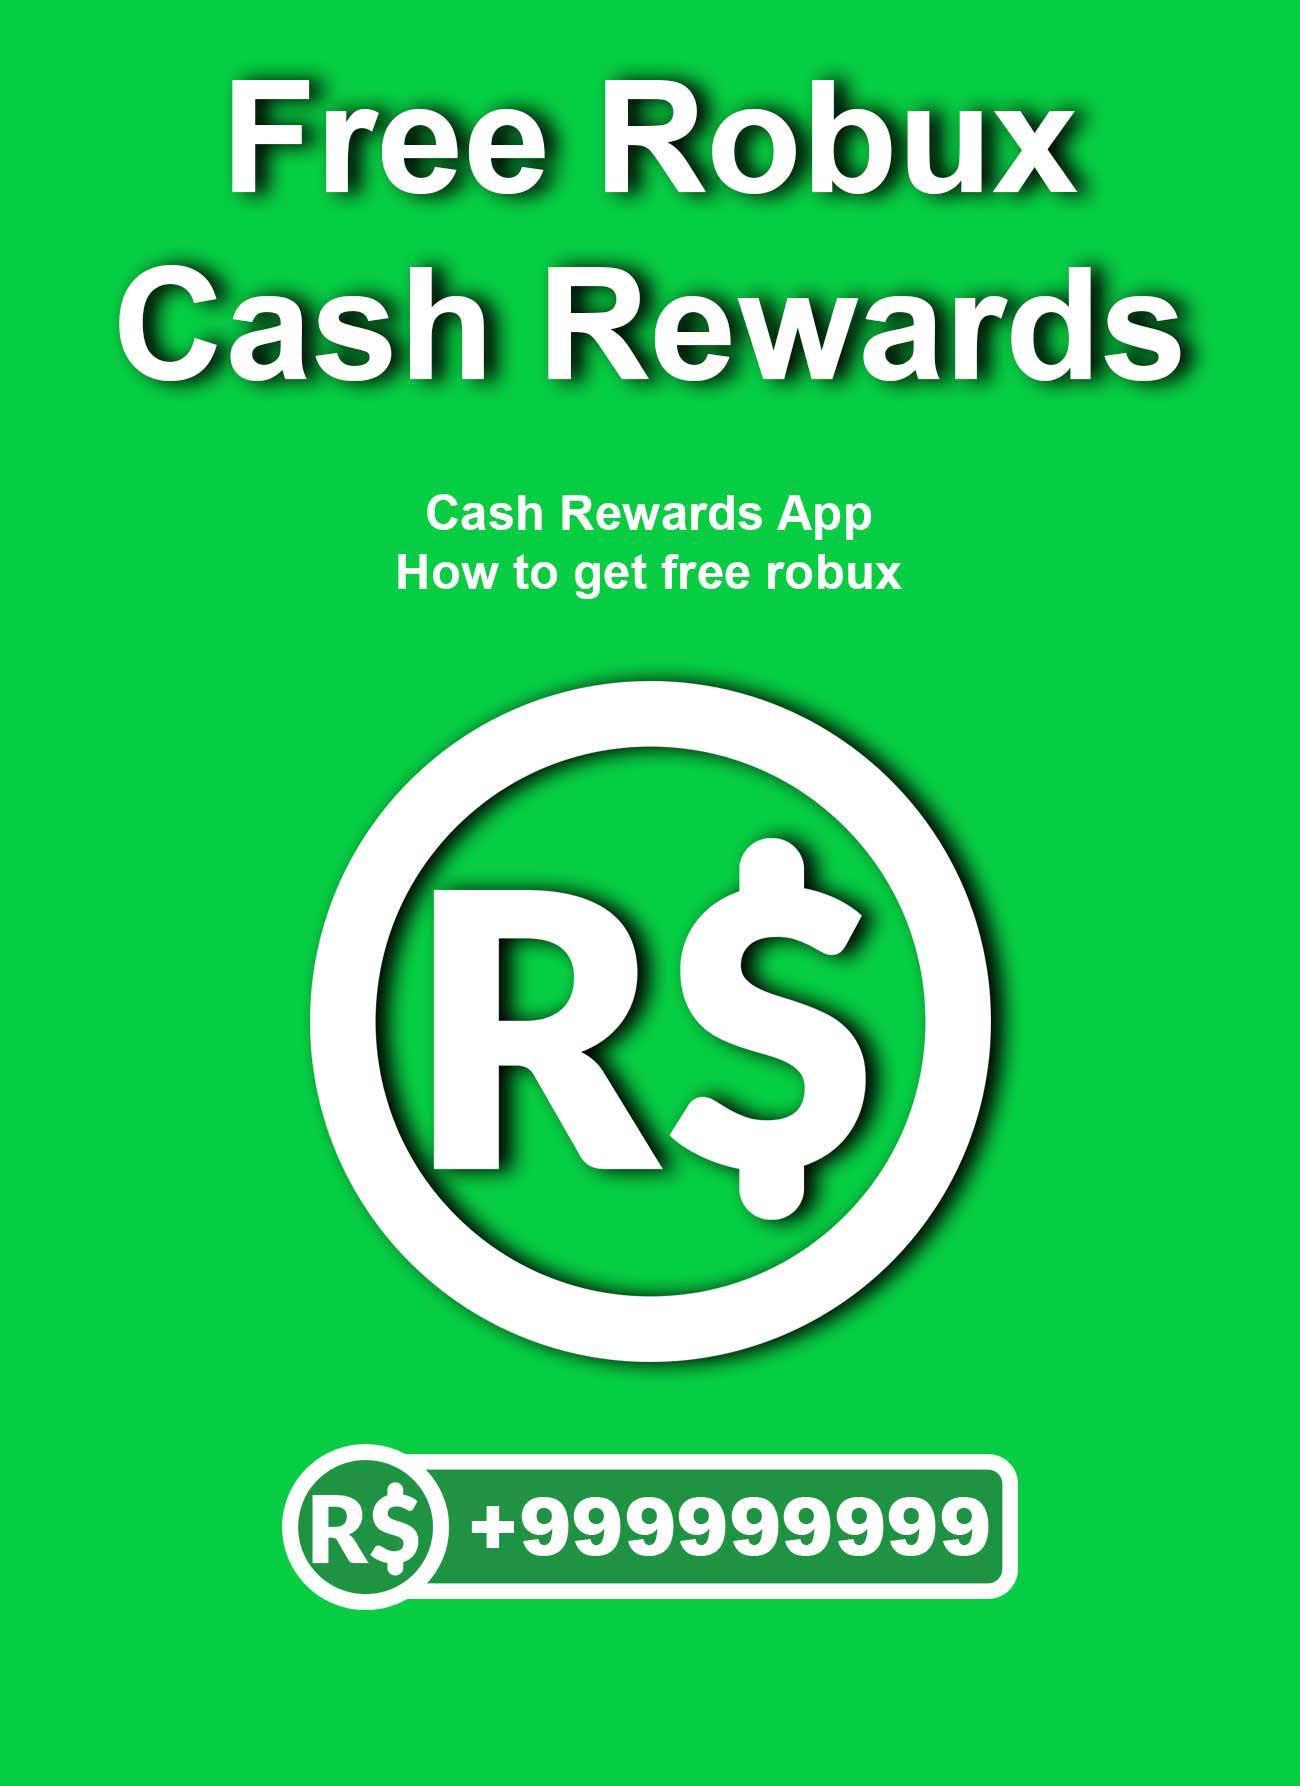 Get Free Robux Tips Best Robux For Free Guide For Android - robux cash pagina 100 real